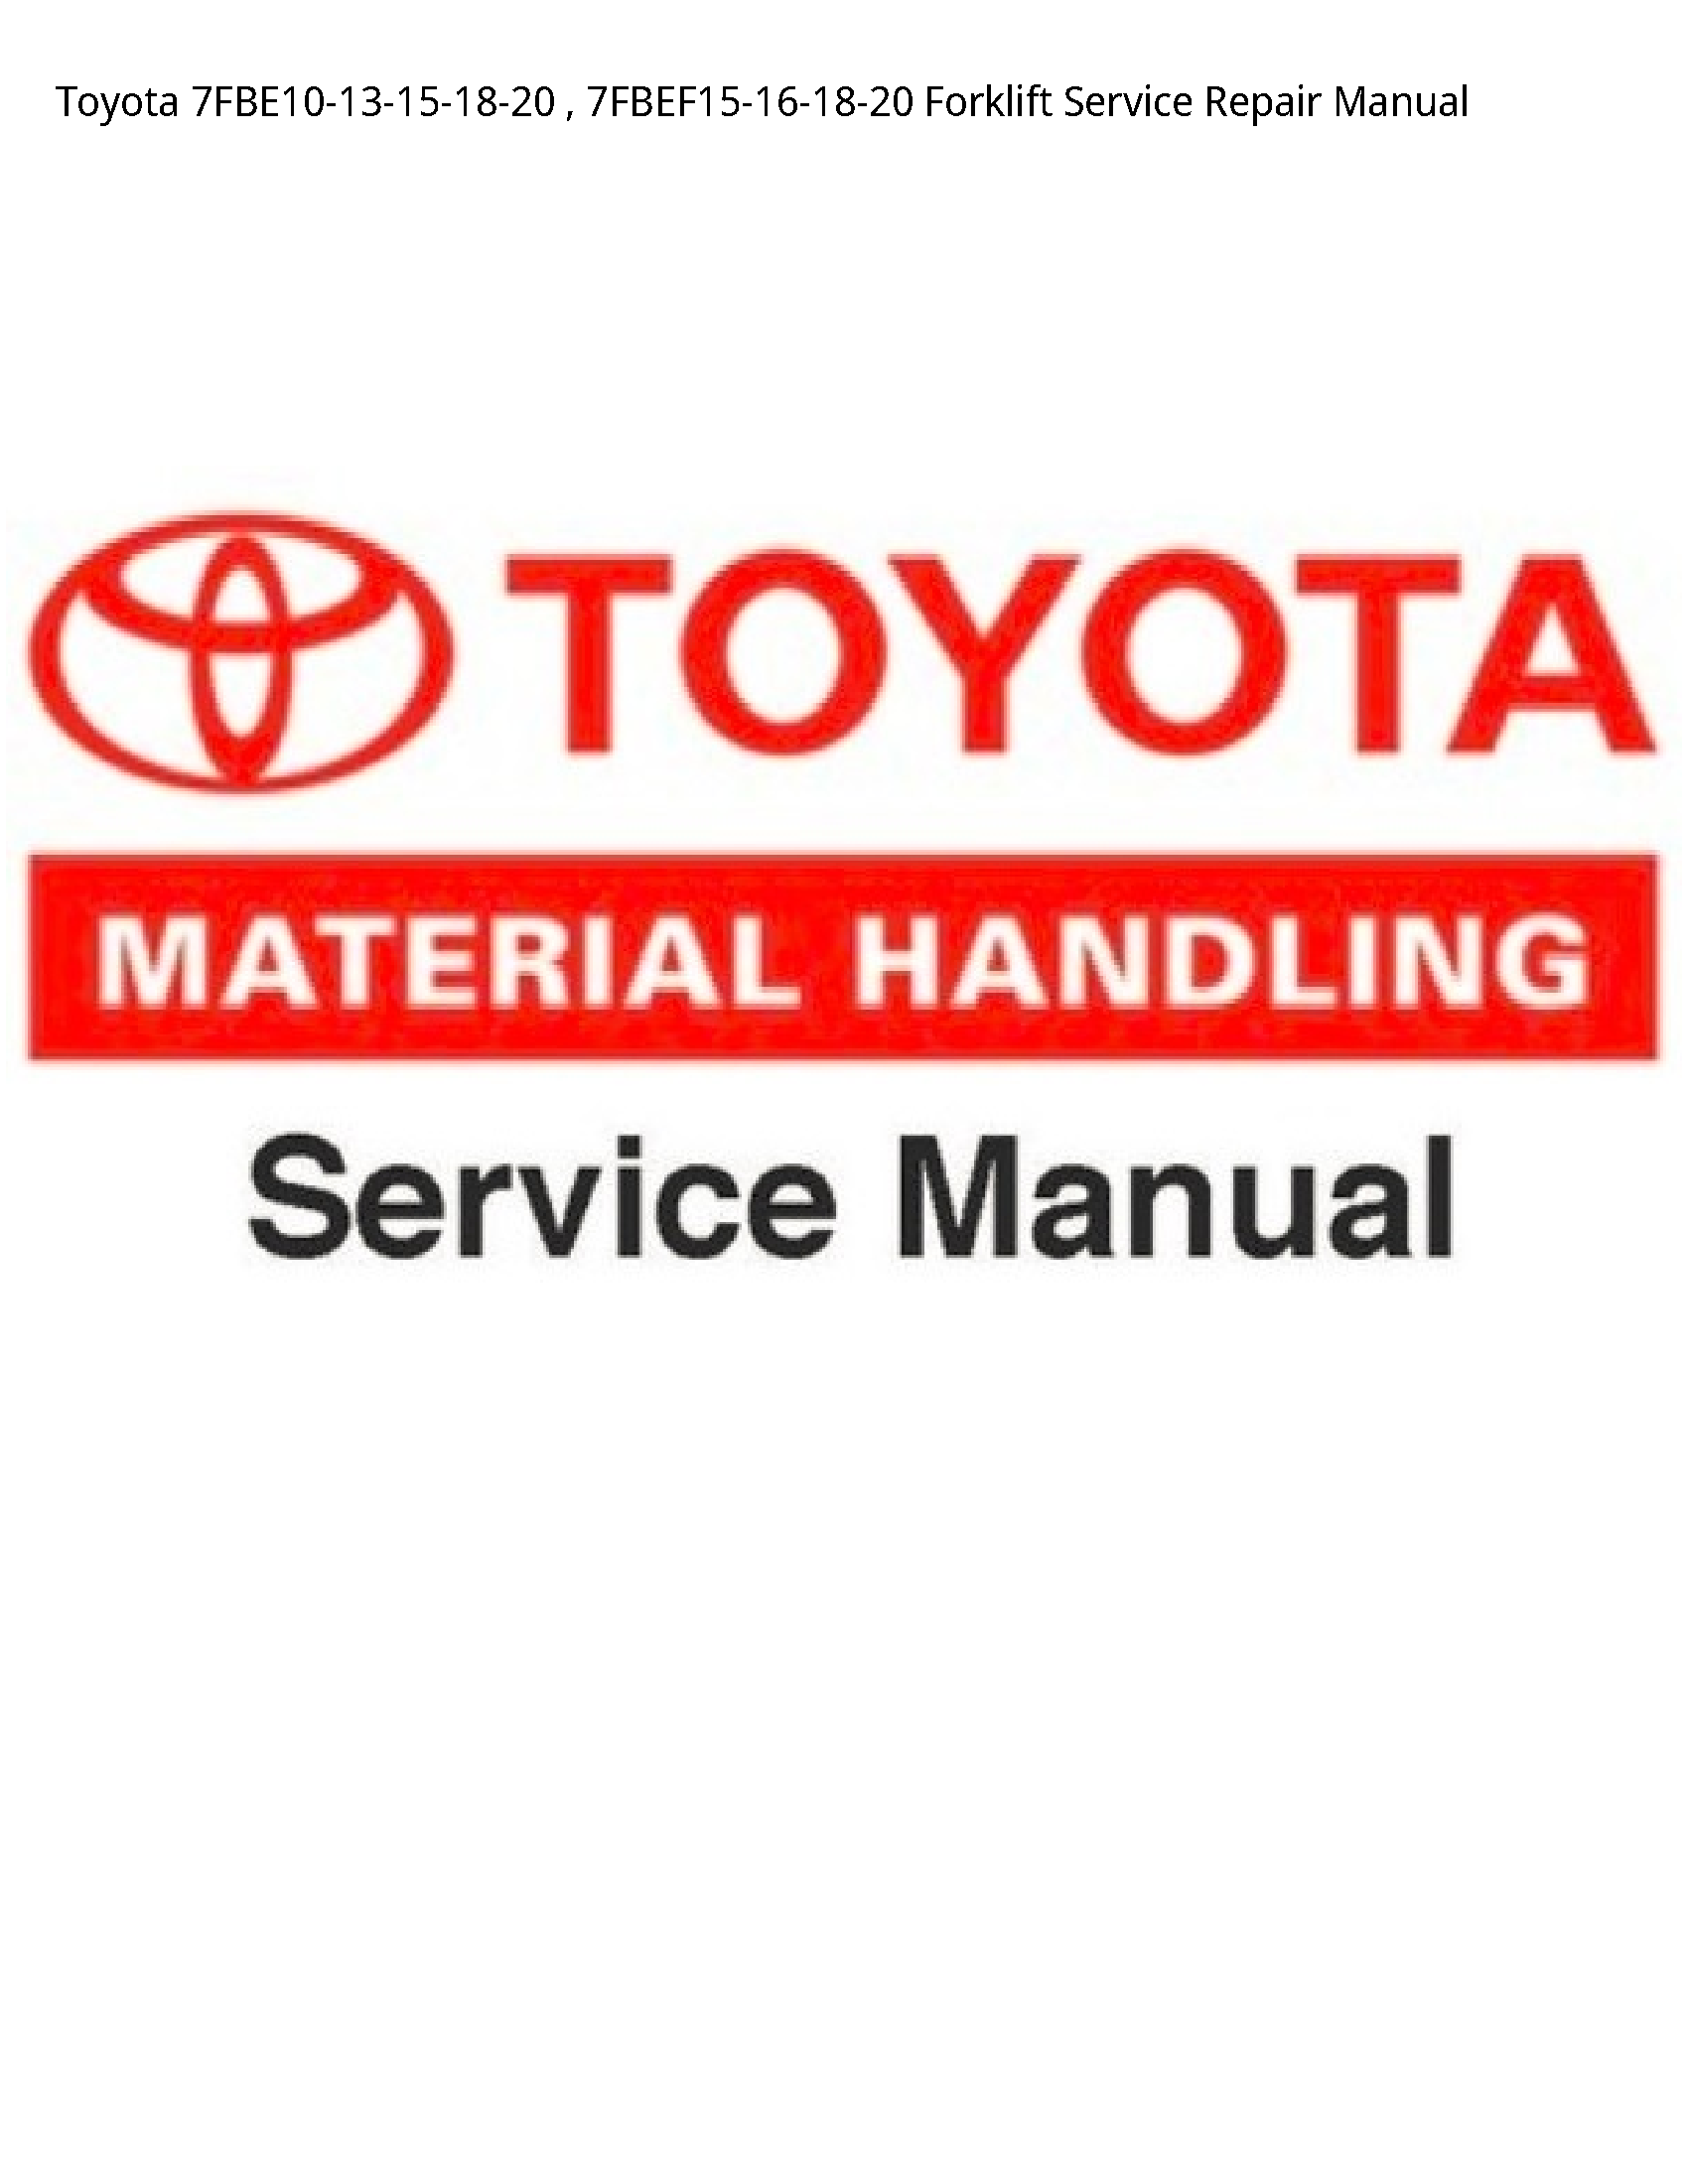 Toyota 7FBE10-13-15-18-20 Forklift manual